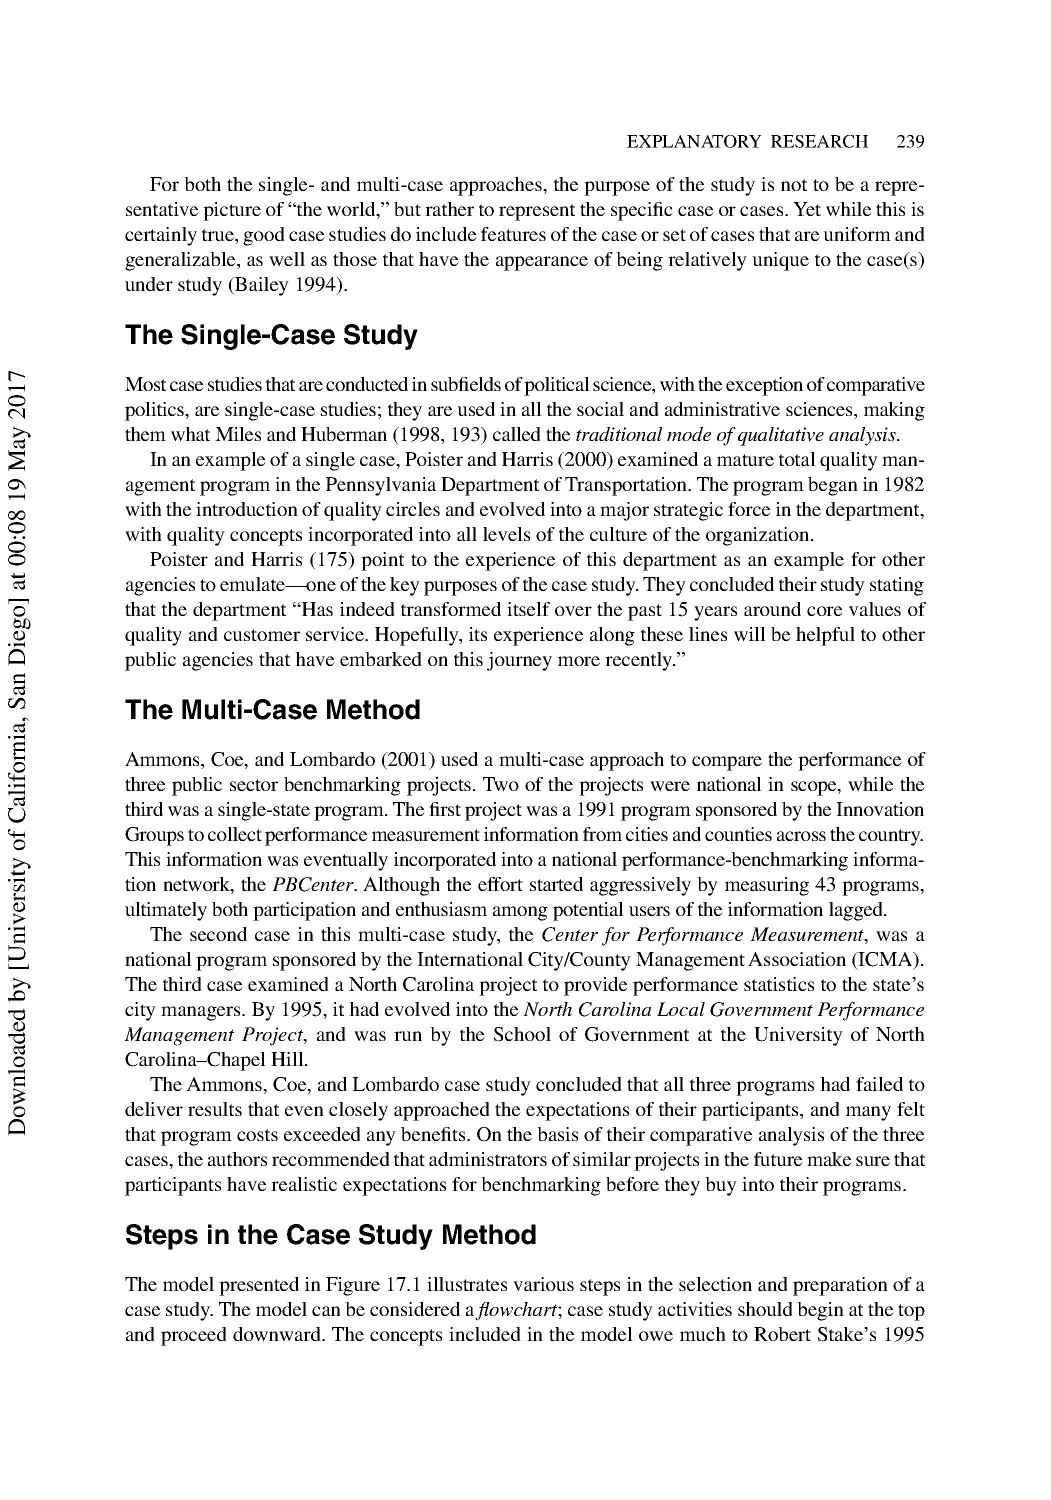 The Single-Case Study
The Multi-Case Method
Steps in the Case Study Method